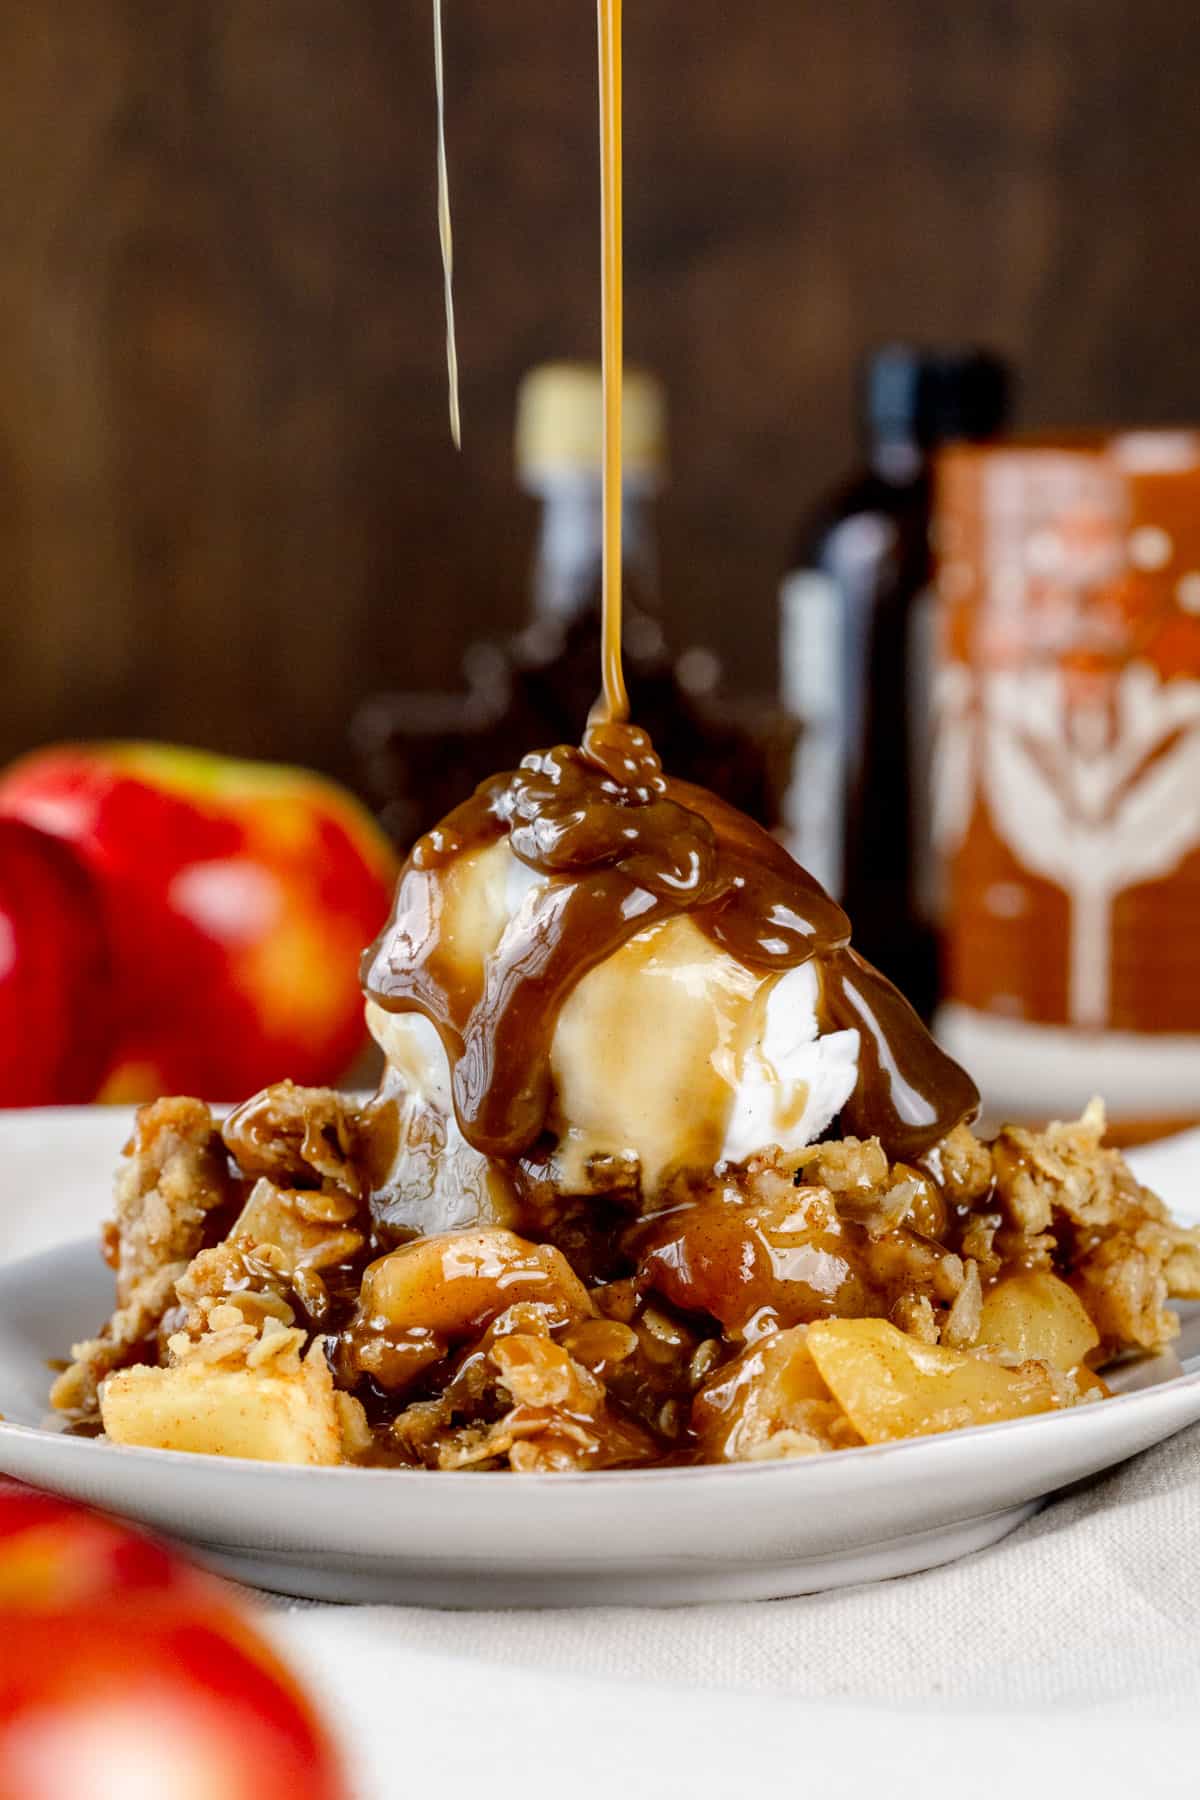 A plate covered in apple crisp with a scoop of vanilla ice cream with fresh caramel sauce being poured over top is on a kitchen table with more apples and syrup blurred in the background.